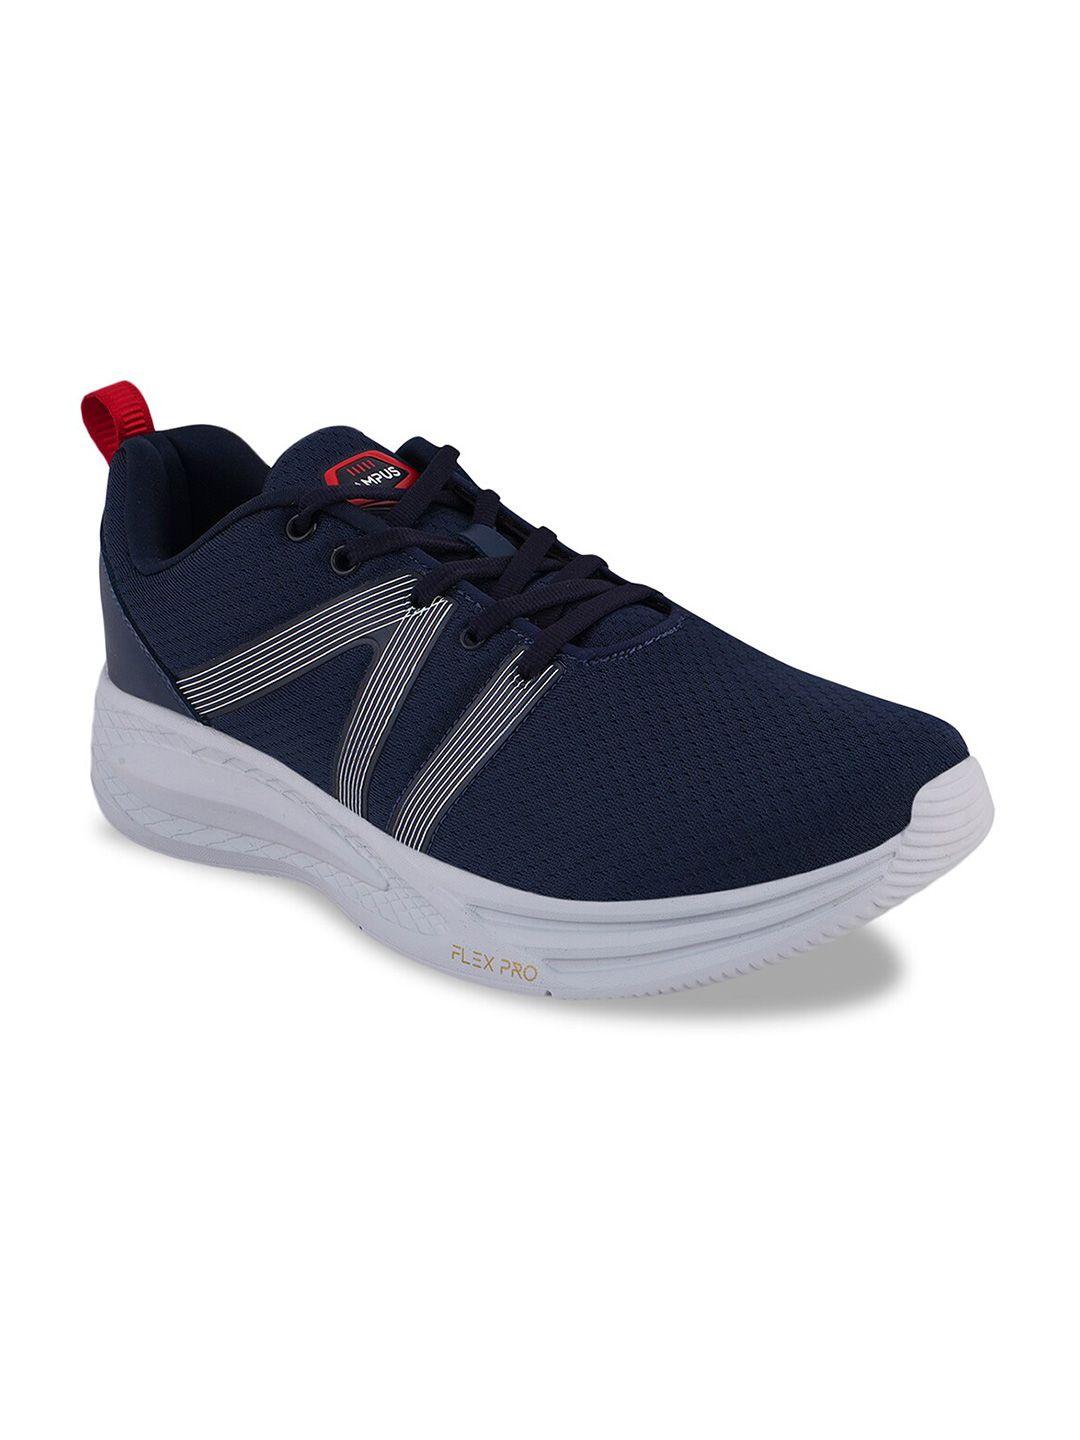 campus men bosco mesh lace-up non-marking running sports shoes